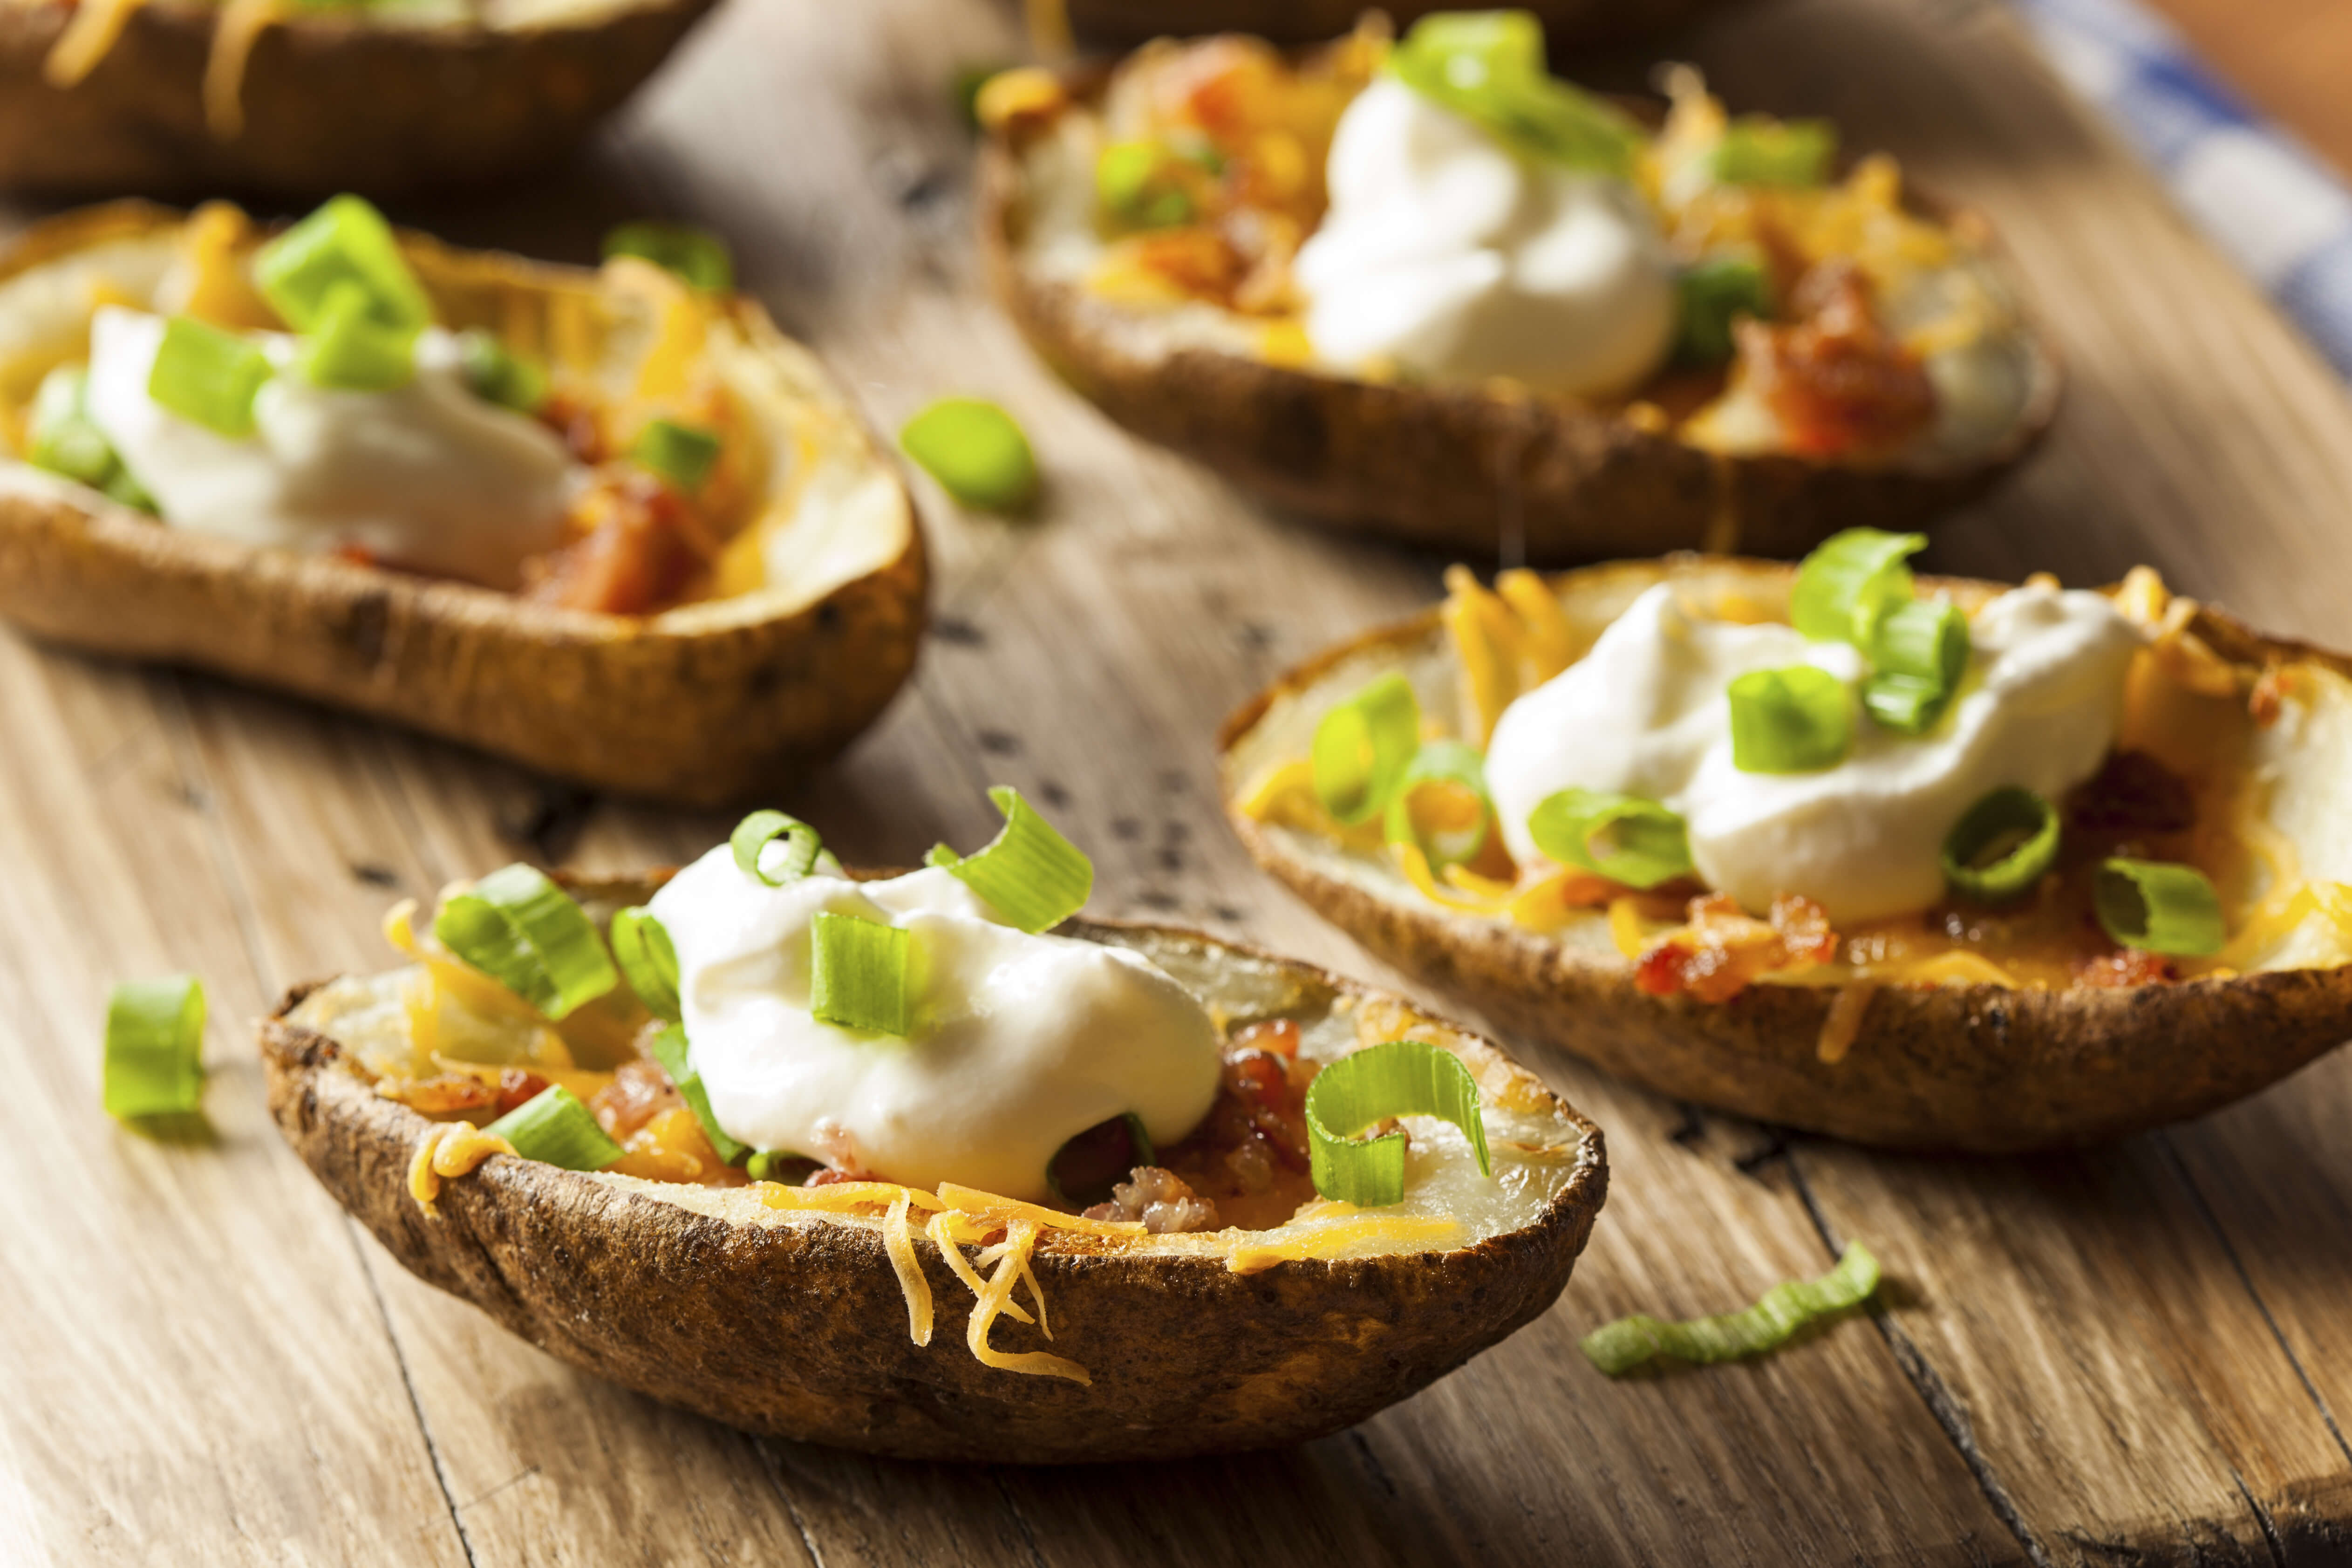 Potato skins are a great way to spice up the way you enjoy potatoes.